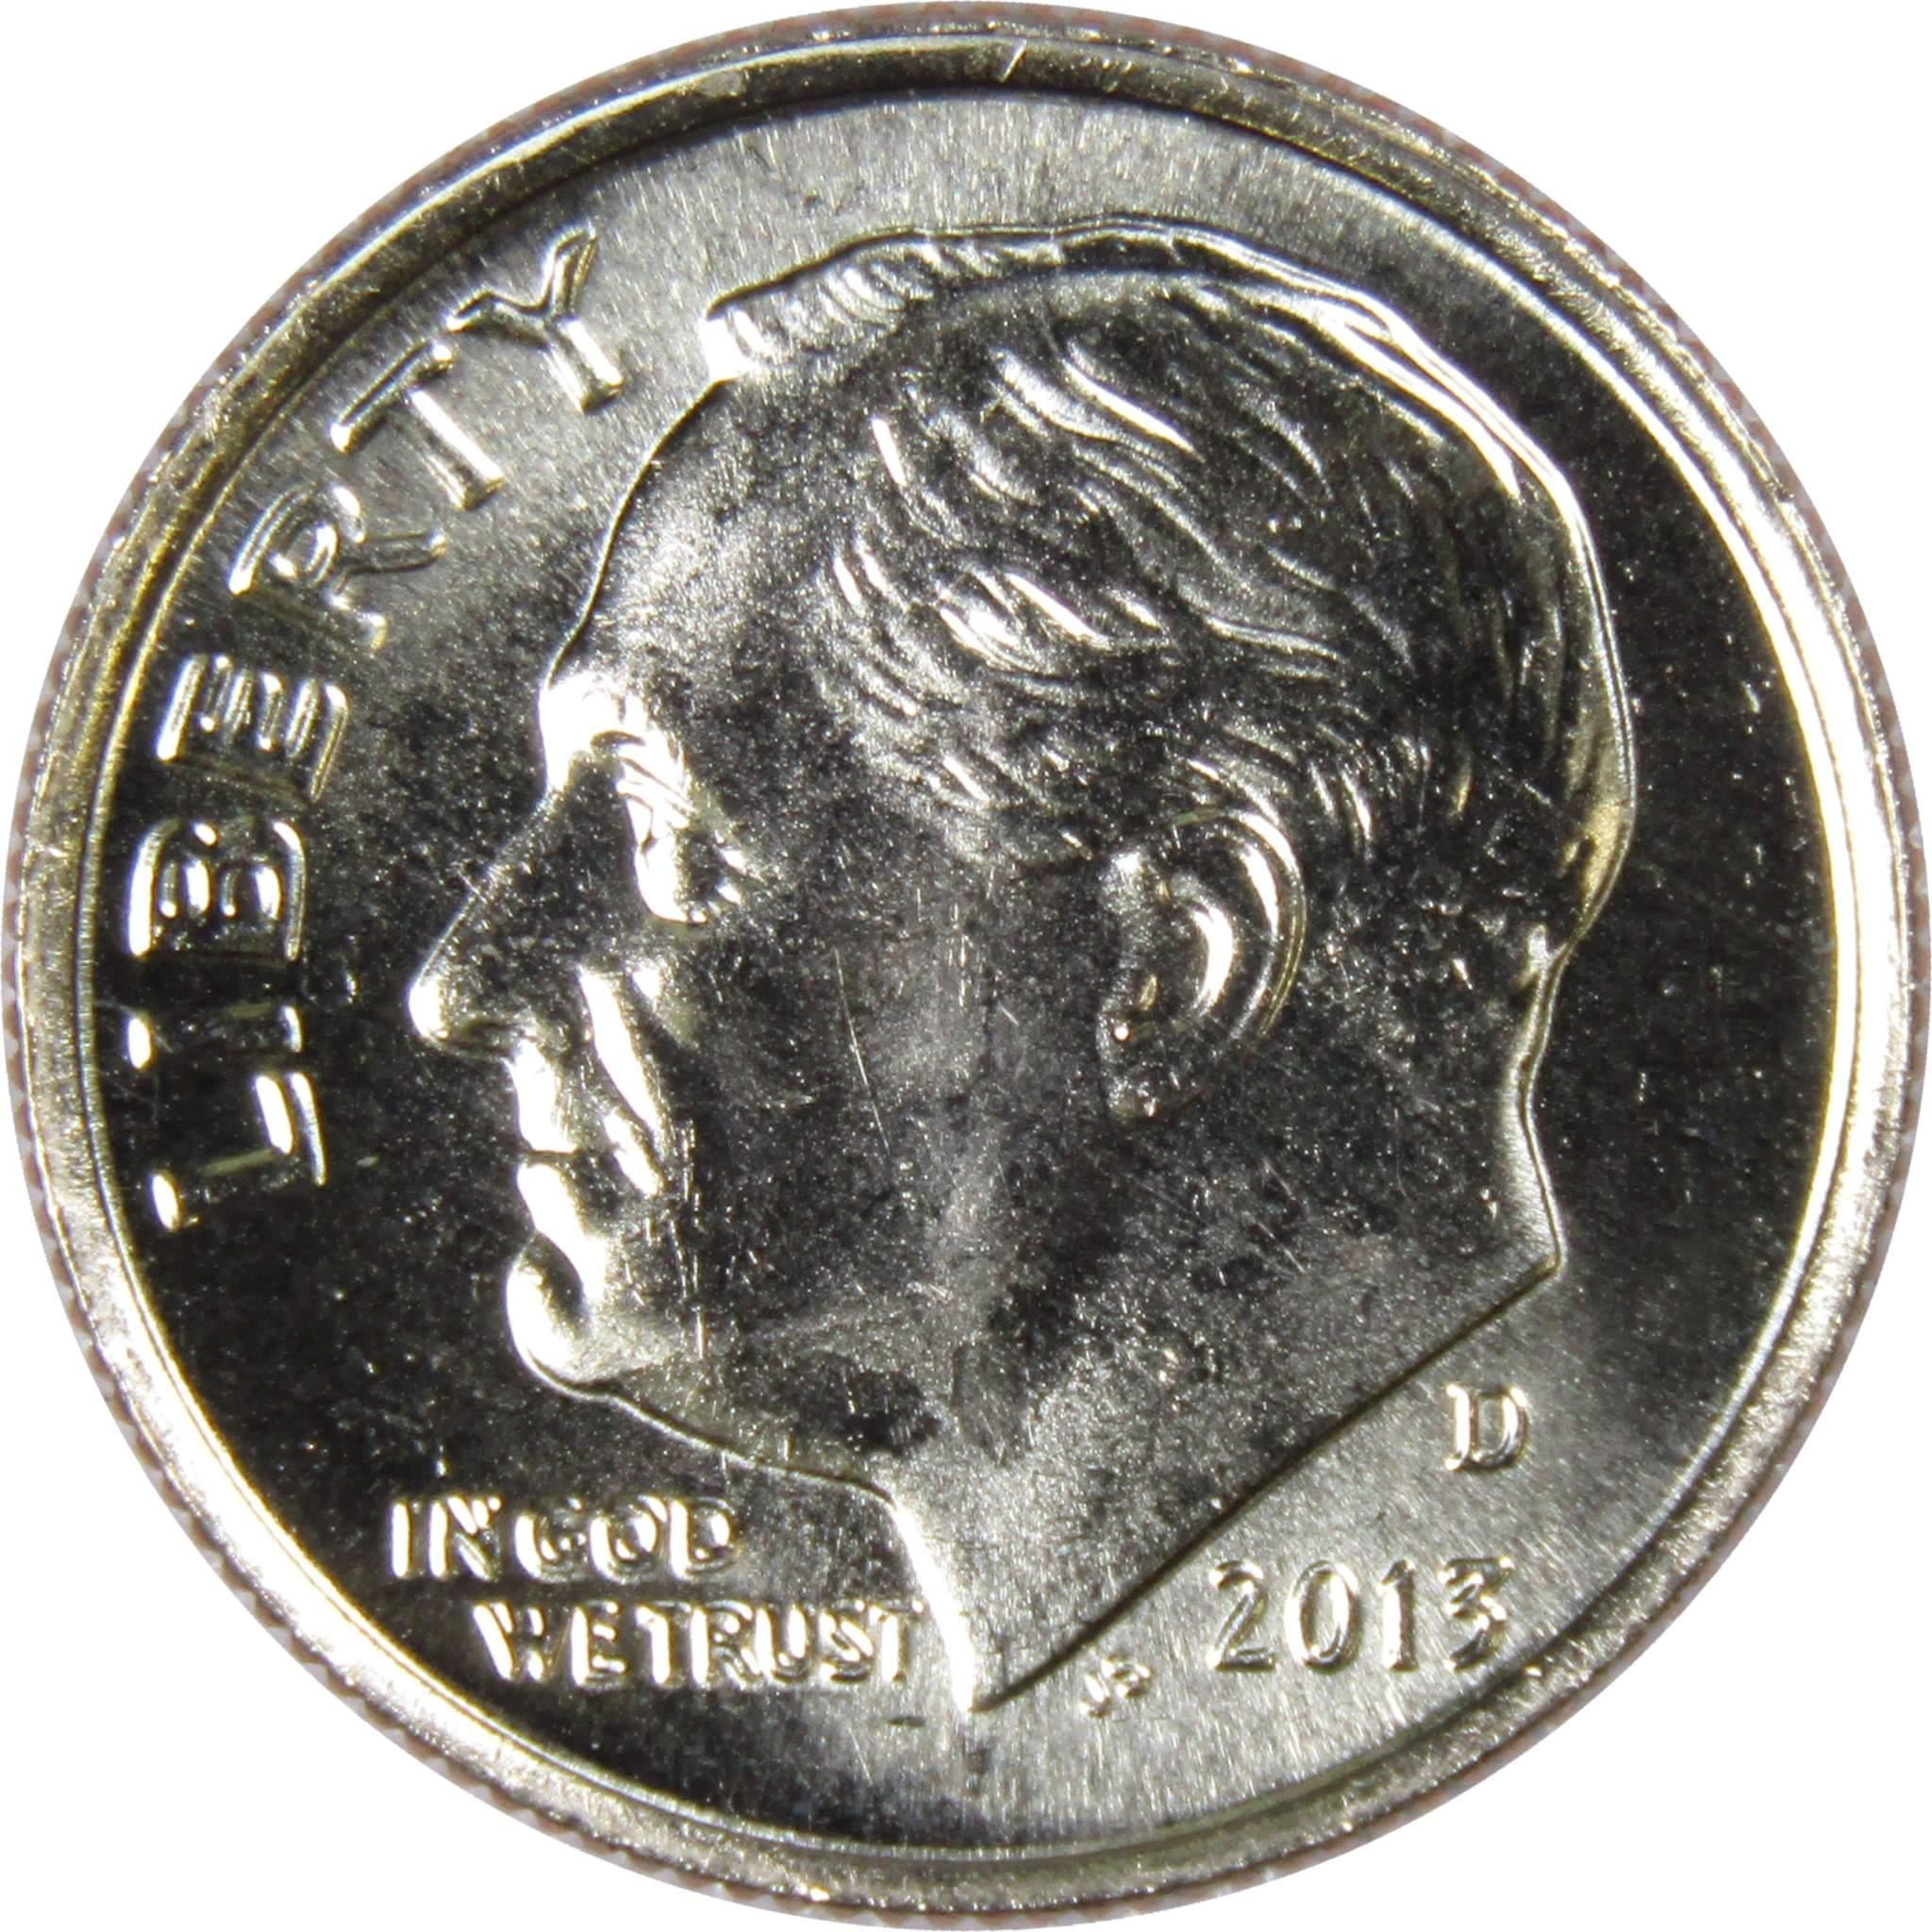 2013 D Roosevelt Dime BU Uncirculated Mint State 10c US Coin Collectible